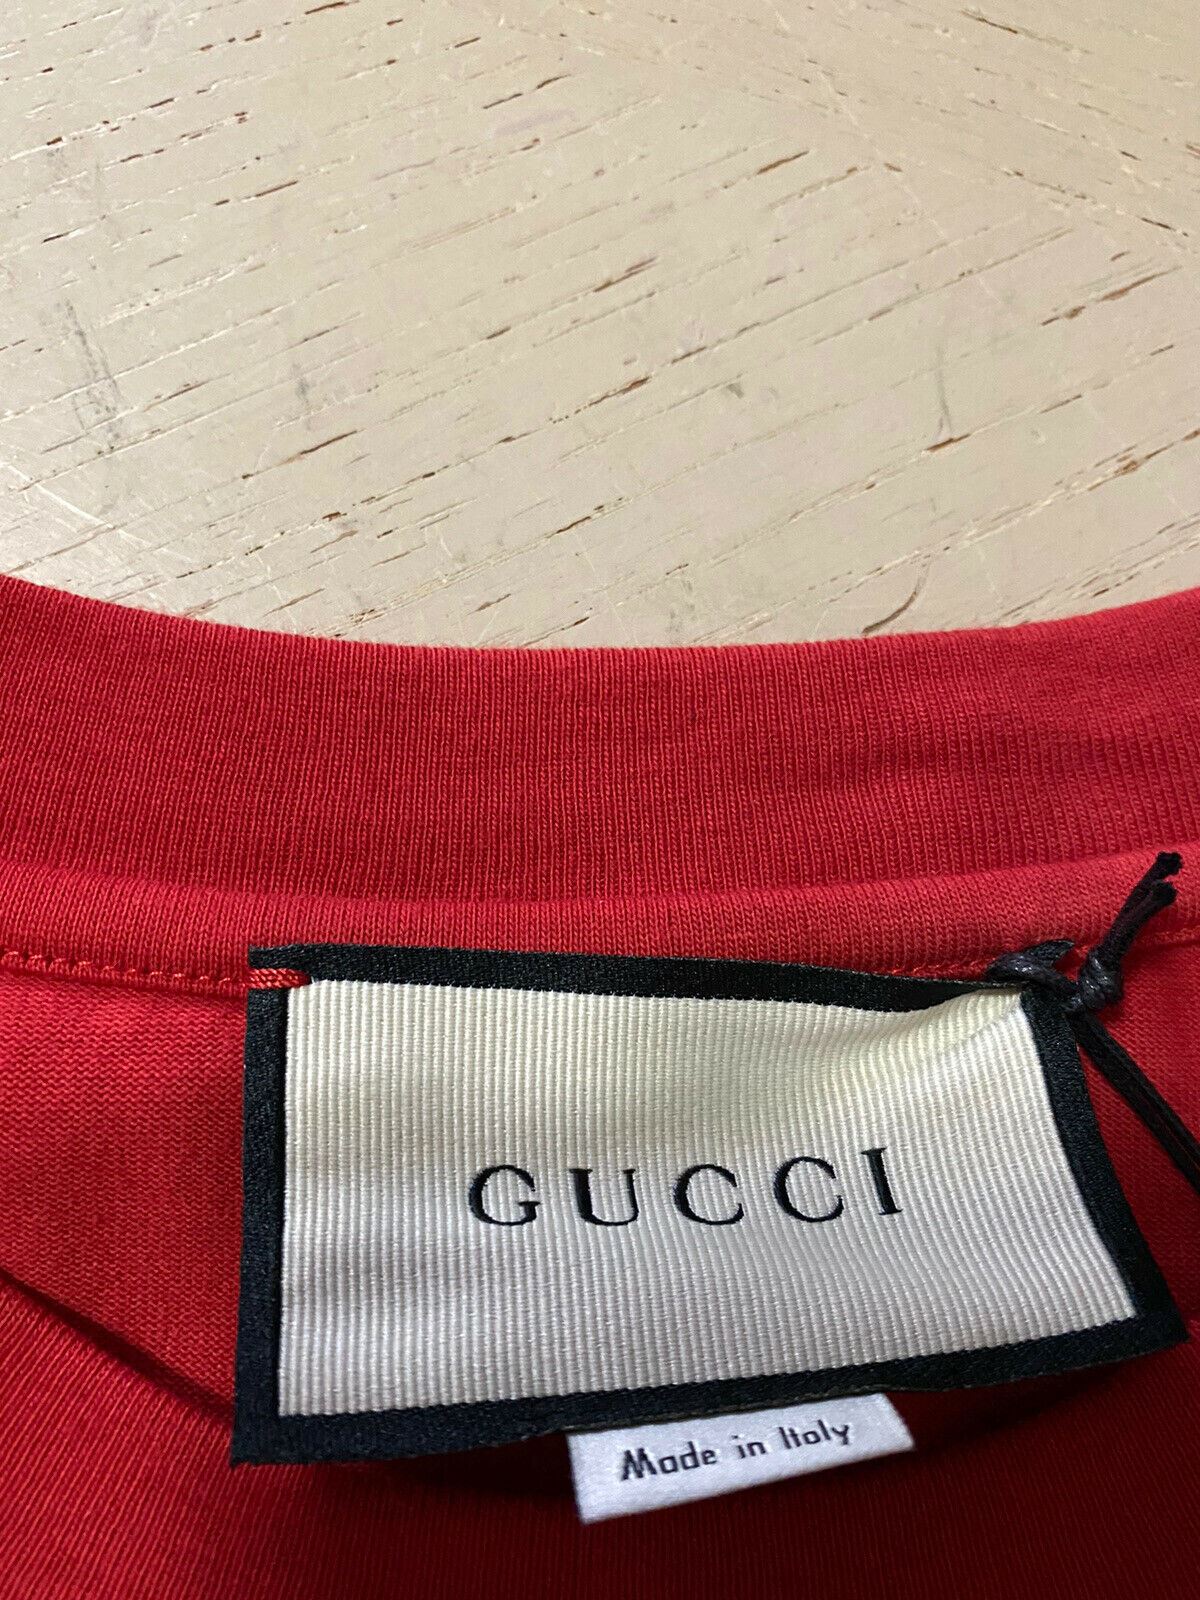 New Gucci Men’s Short Sleeve T Shirt Red Size M Italy